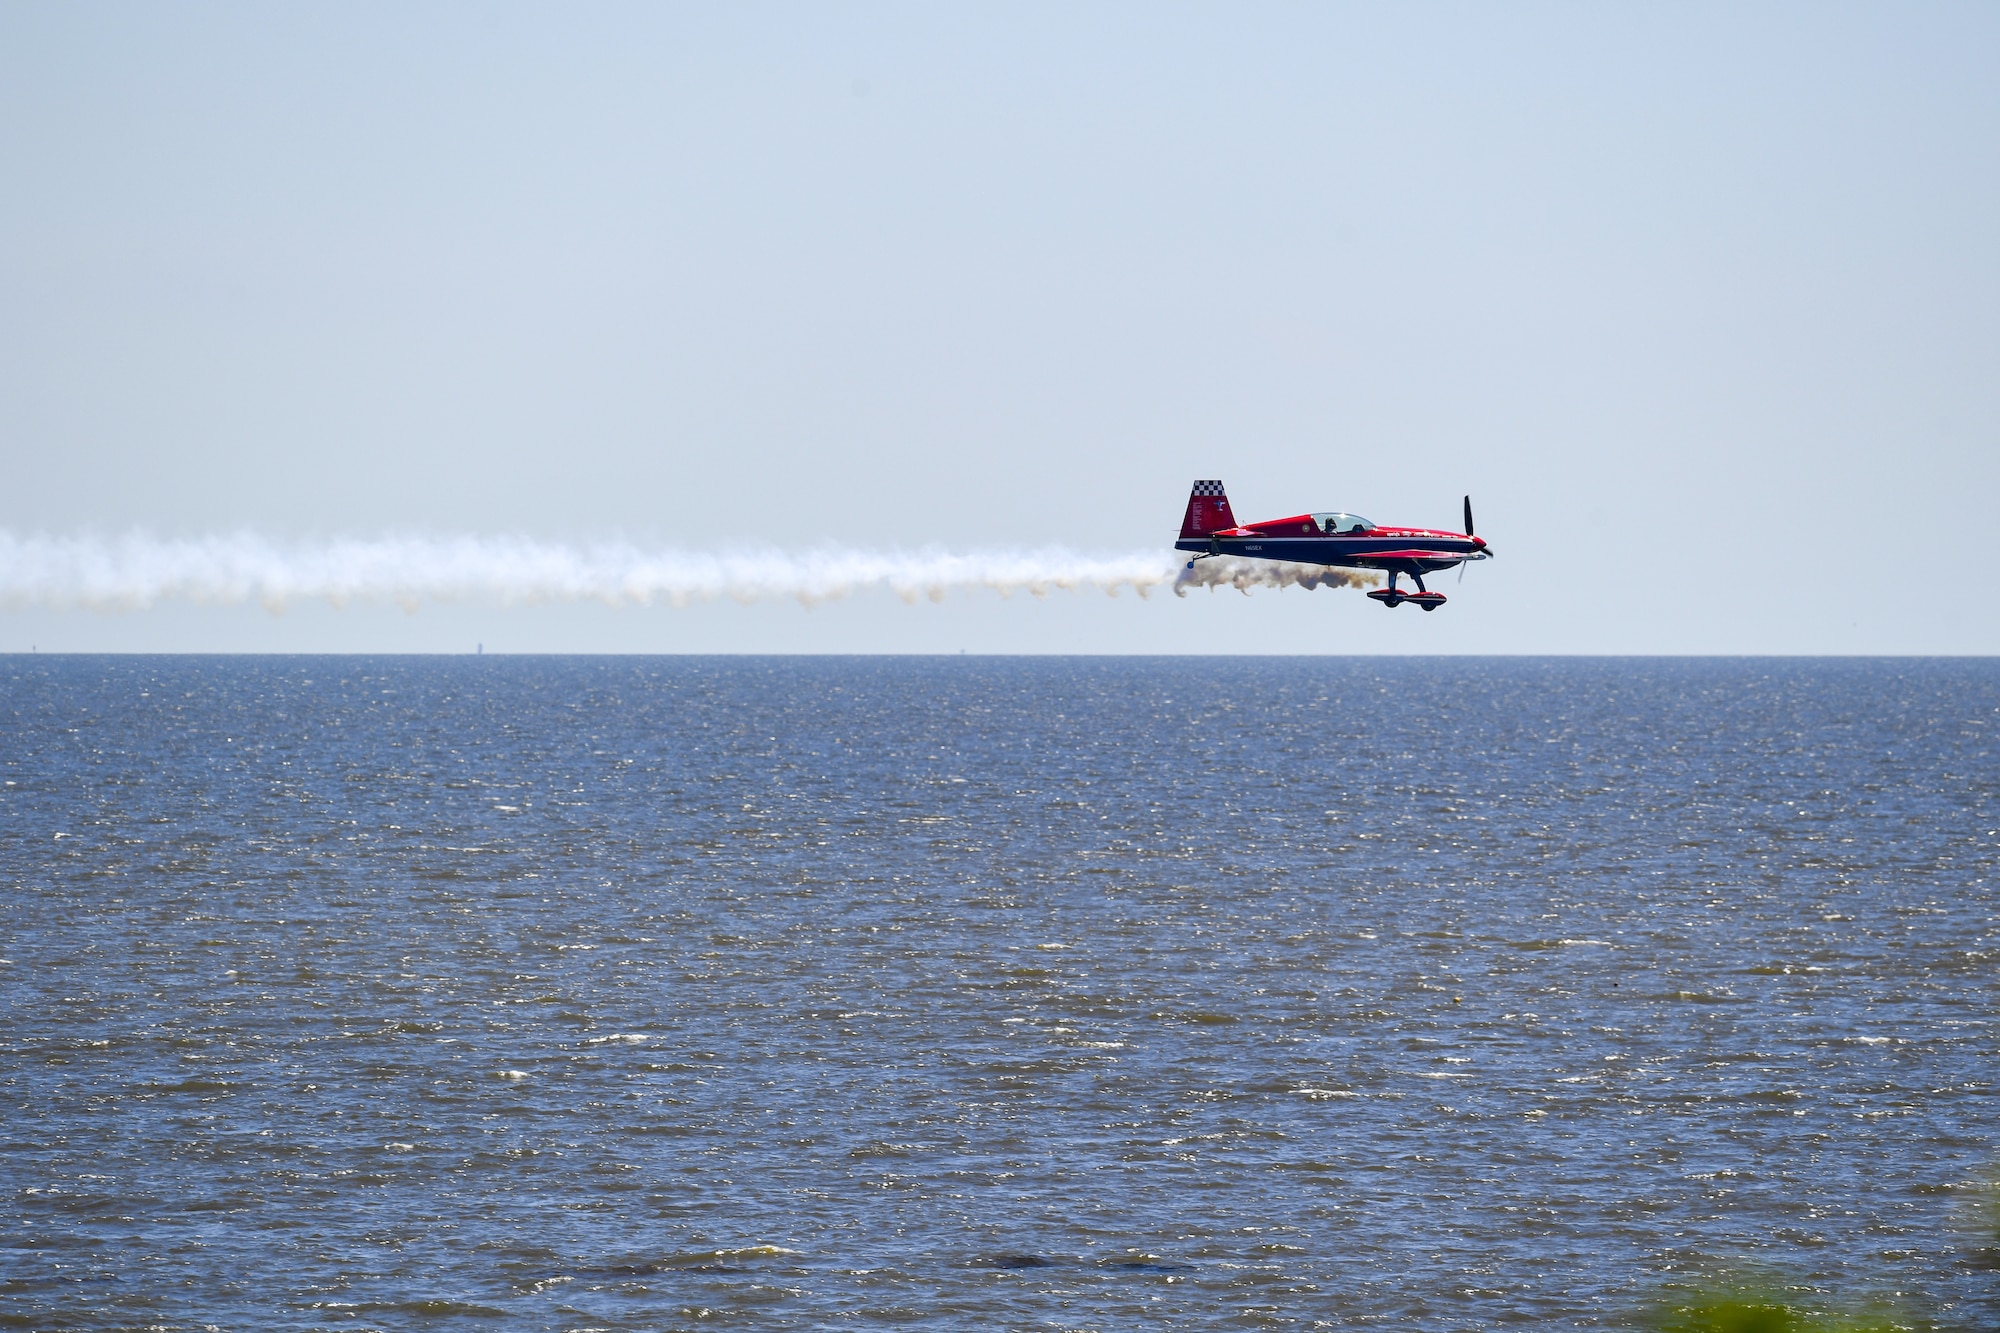 An EXTRA 300S flies over Biloxi Beach during a practice session for the 2023 Thunder Over the Sound Air and Space Show at Biloxi, Mississippi, April 28, 2023. Thunder Over the Sound is a unique event where a military installation and its surrounding city jointly host an air show in two locations; Biloxi Beach and Keesler's flightline. (U.S. Air Force photo by Kemberly Groue)